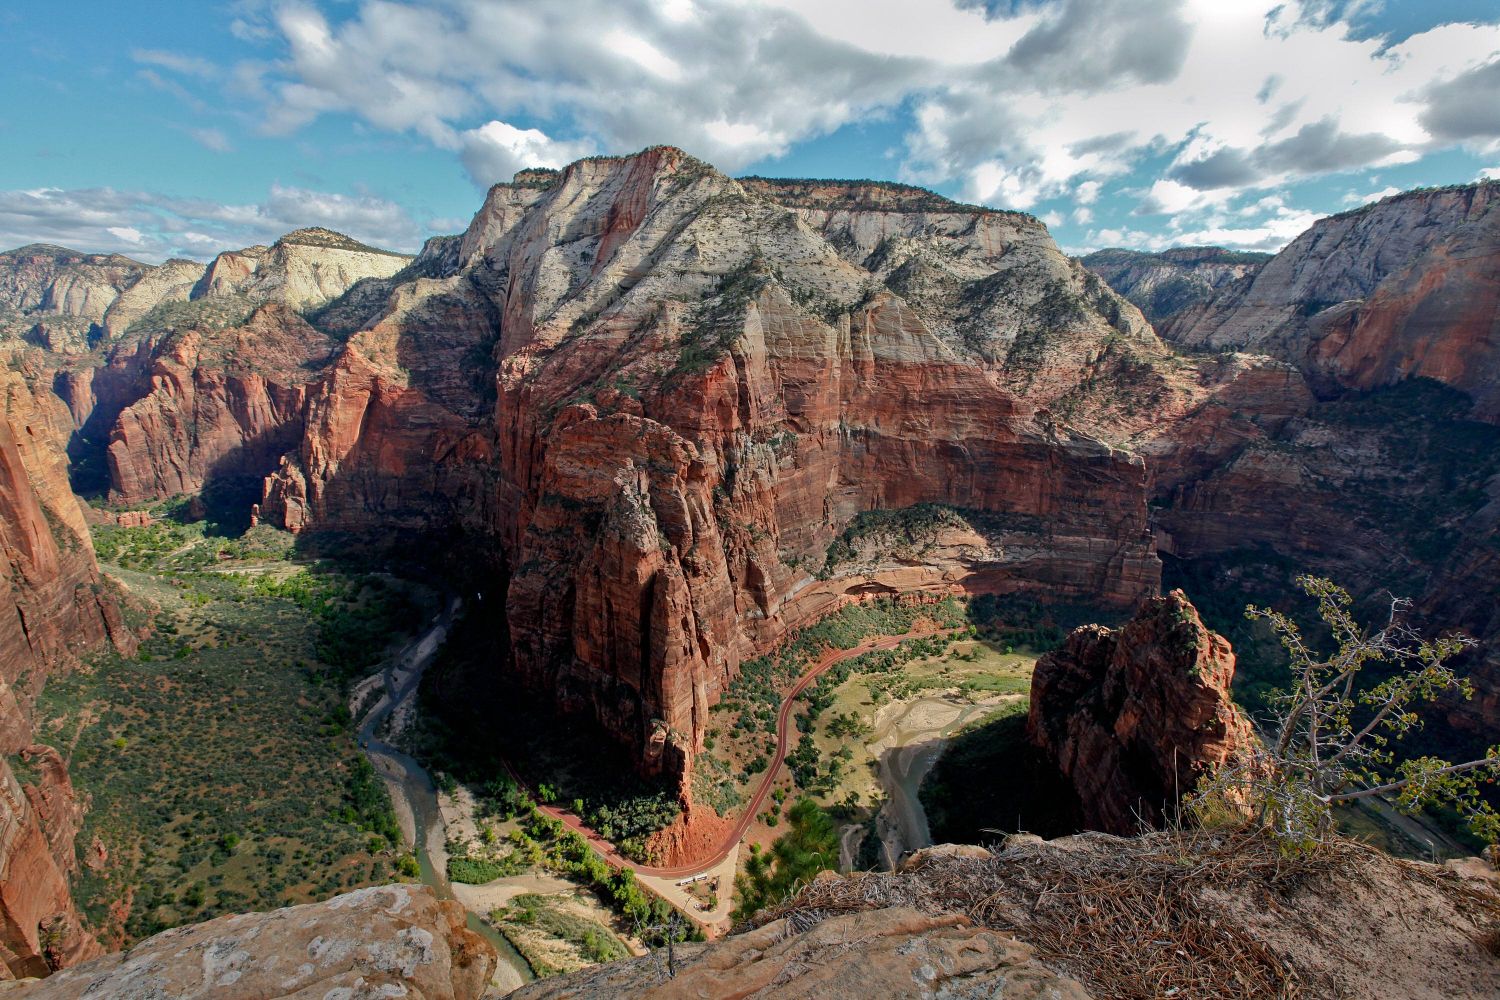 The Organ and Big Bend from Angels Landing